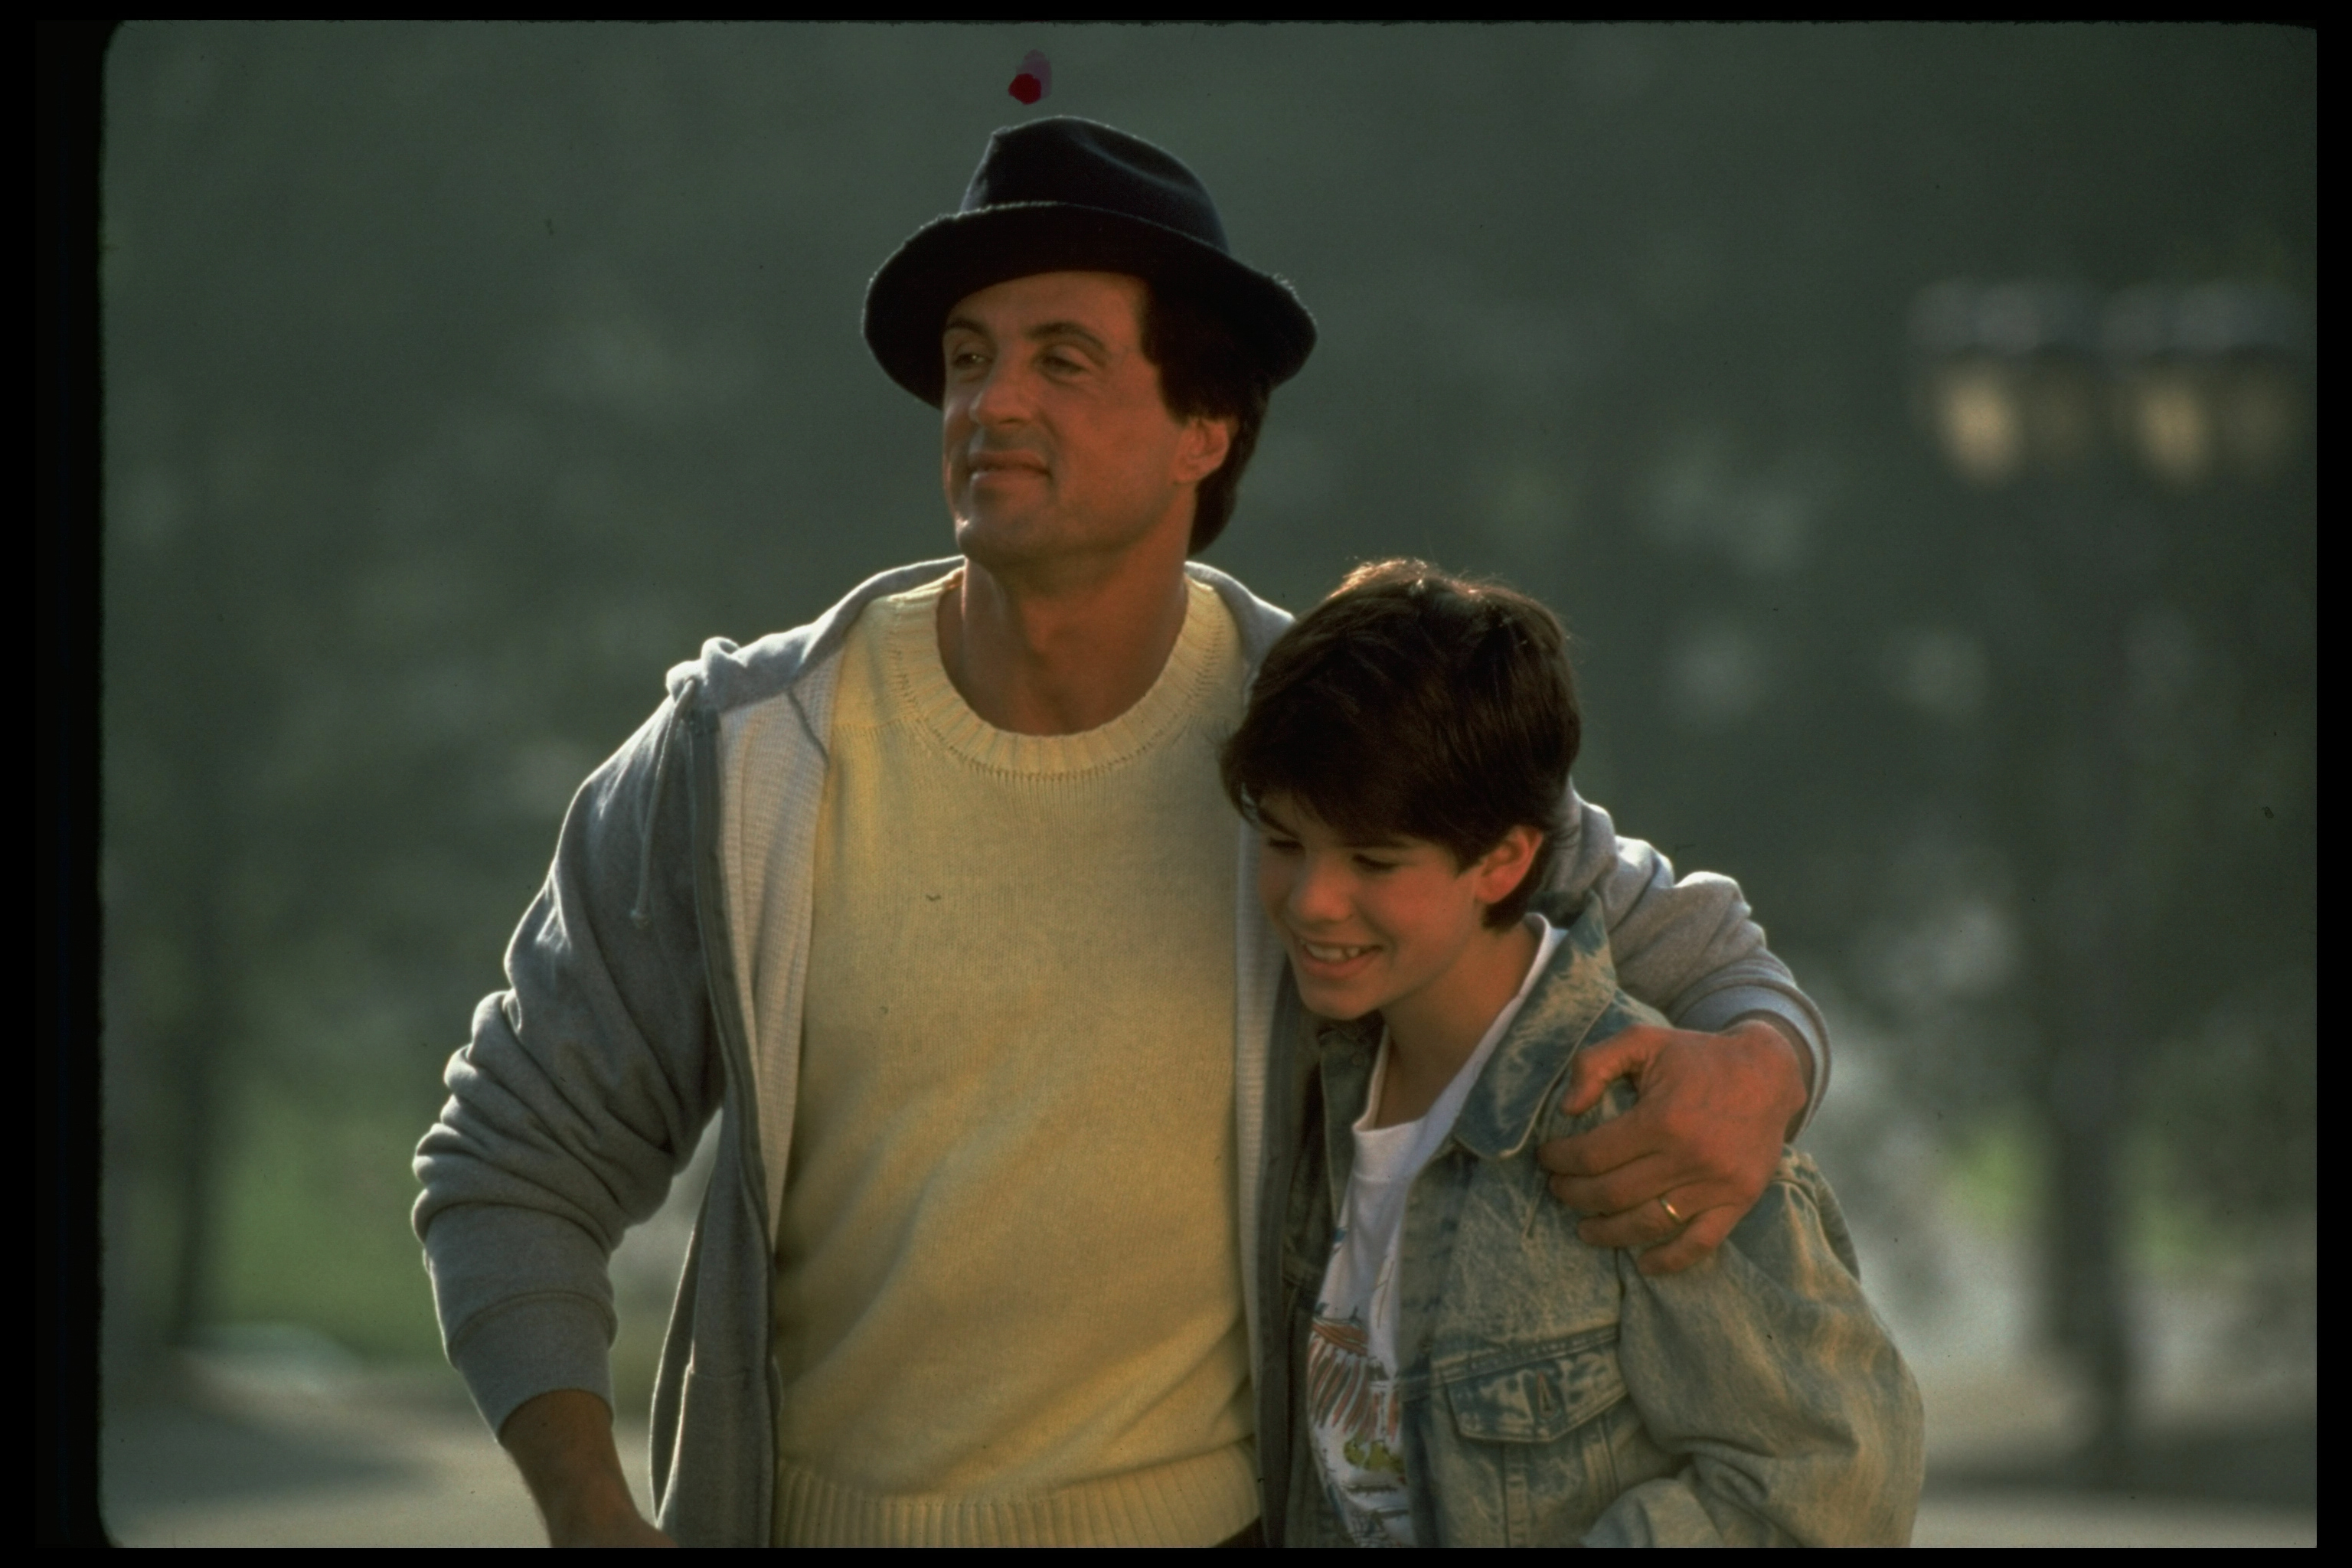 The boy and his father on the set of the MGM/UA movie "Rocky V" in 1990. | Source: Getty Images